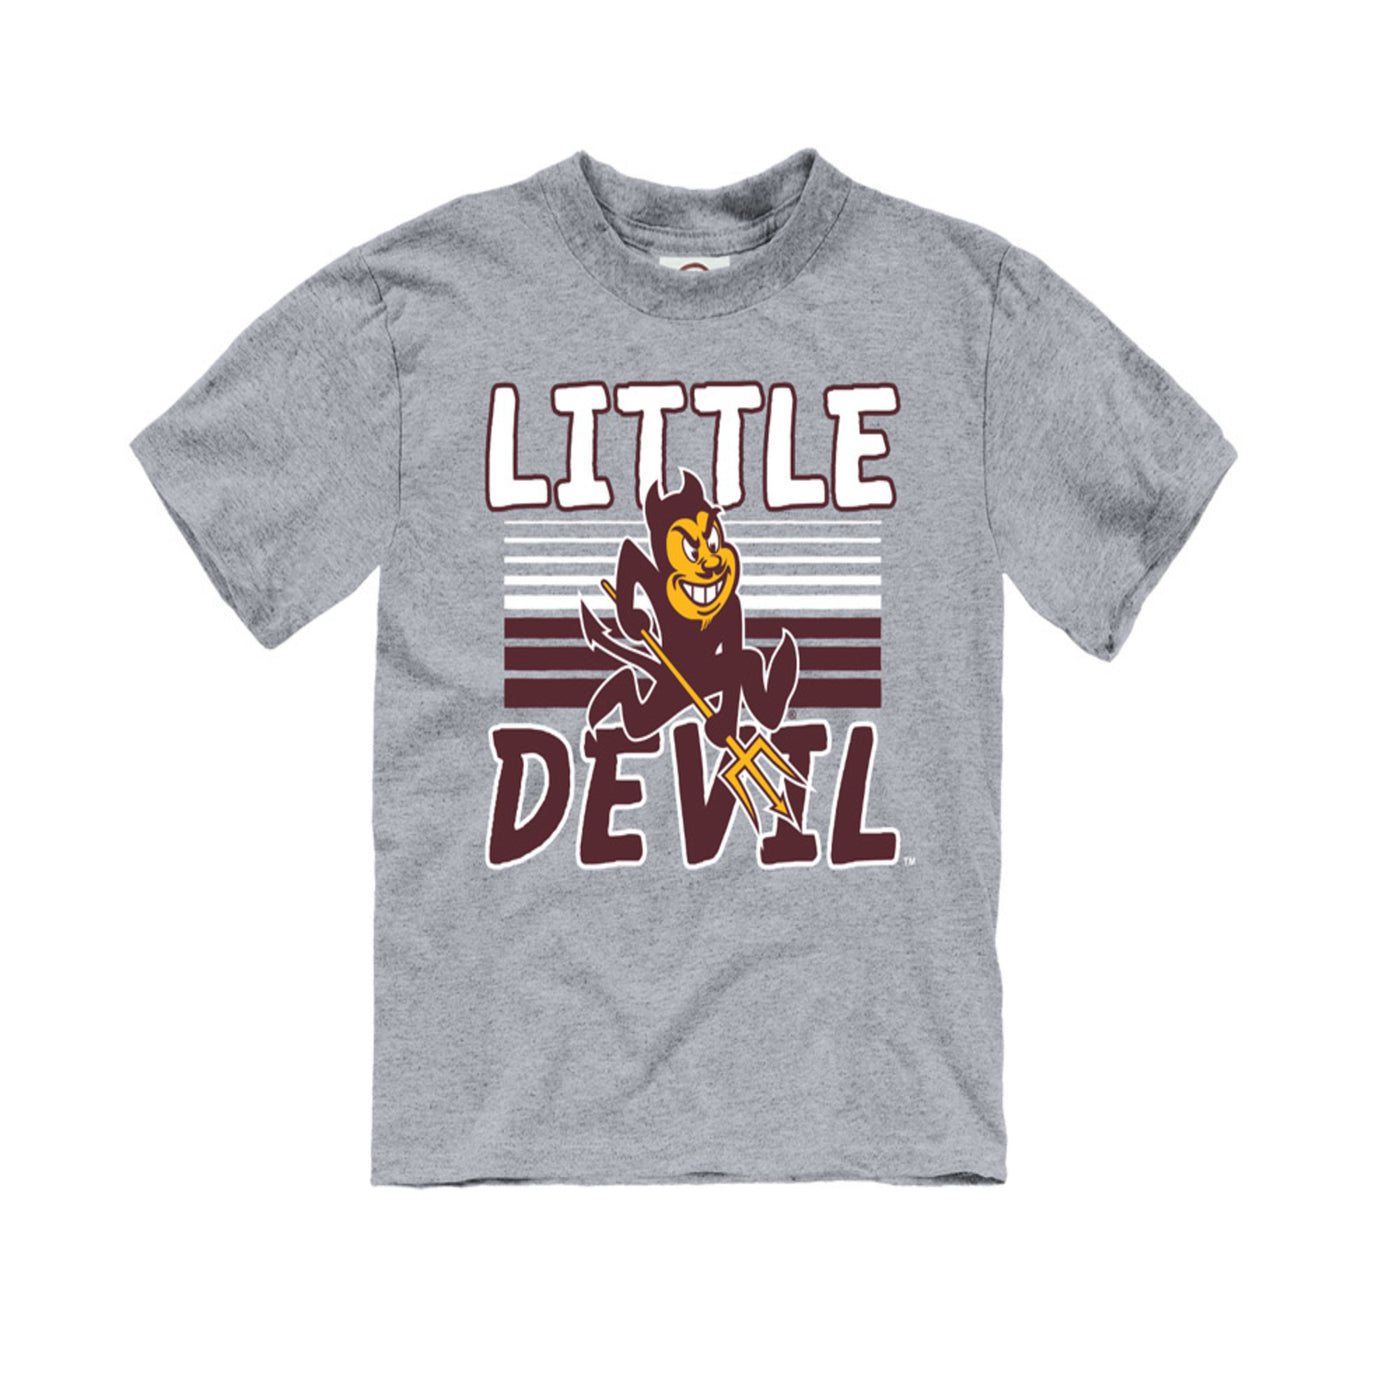 ASU grey youth shirt with the text 